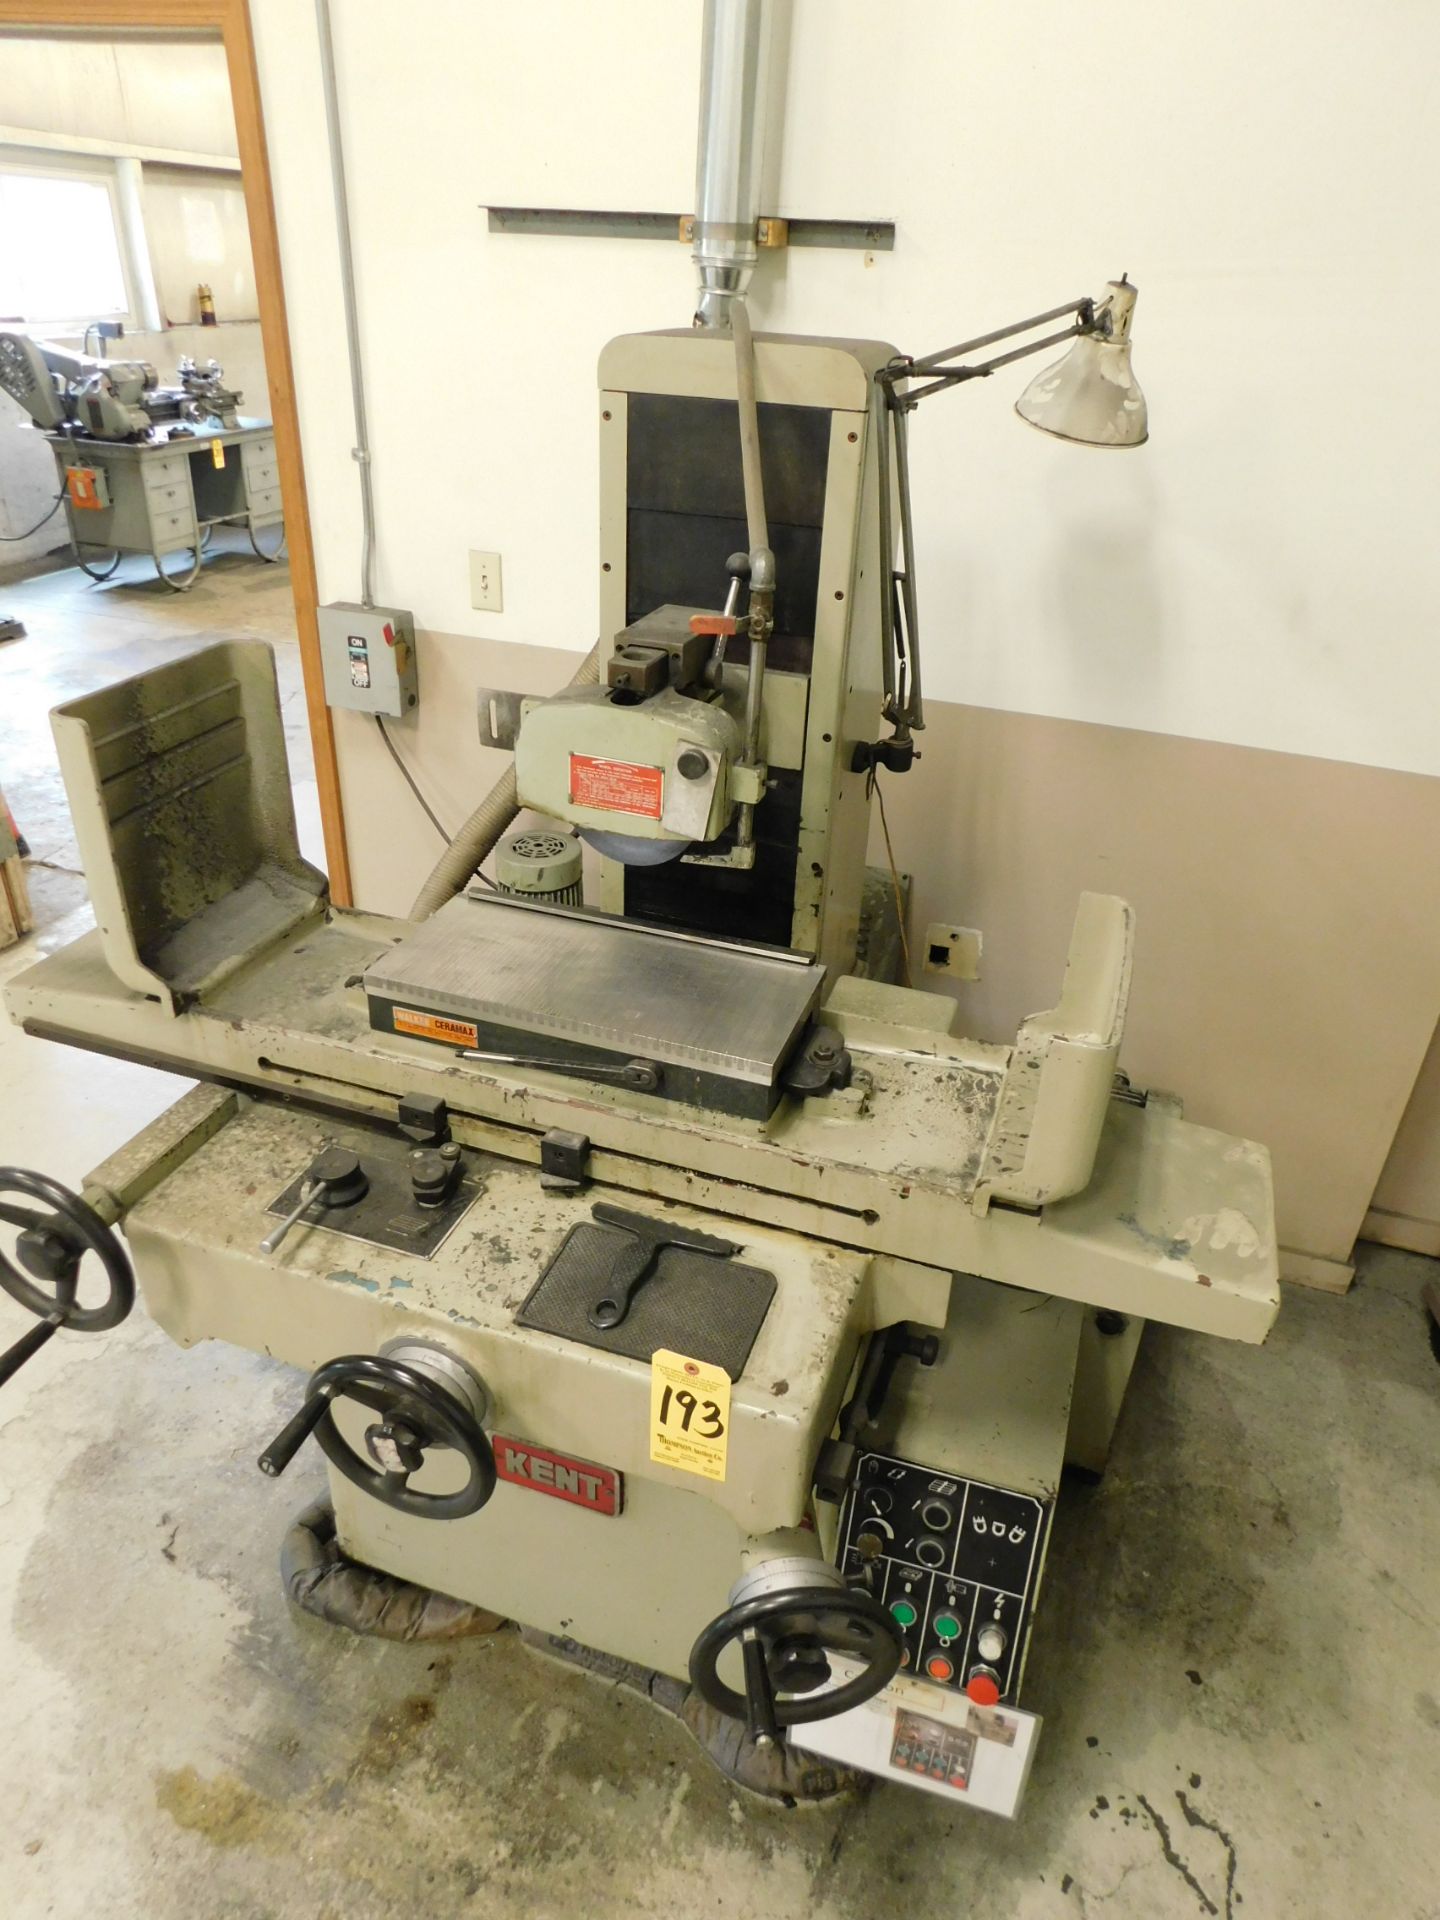 Kent Model KGS-250AH Hydraulic Surface Grinder, s/n 811203-1, 8 In. X 18 In. Permanent Magnetic - Image 2 of 14